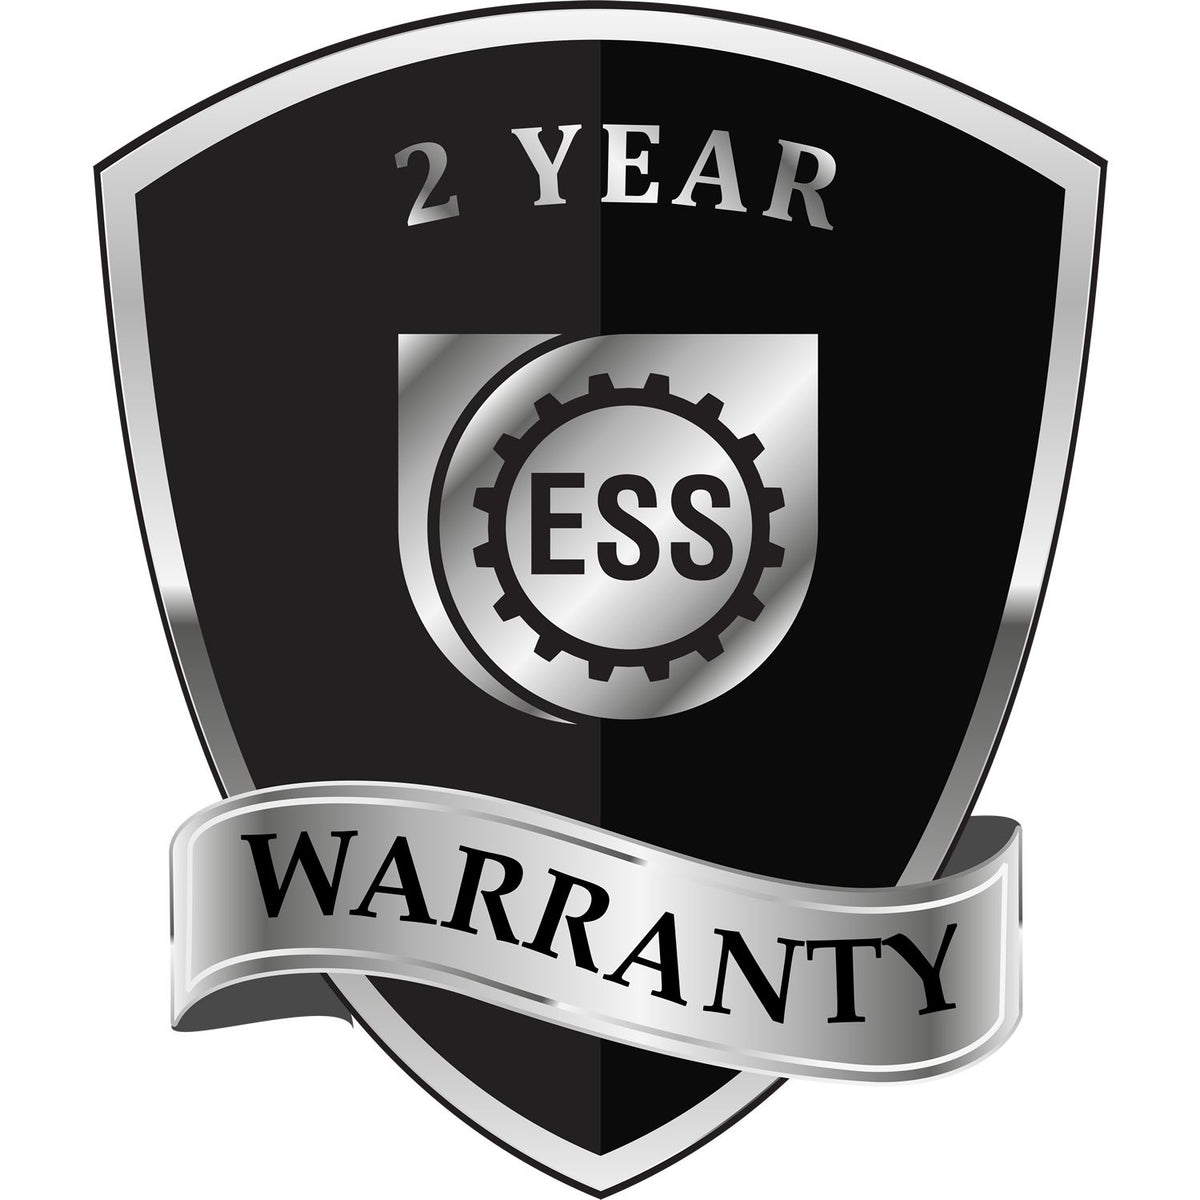 A badge or emblem showing a warranty icon for the Extended Long Reach Michigan Surveyor Embosser